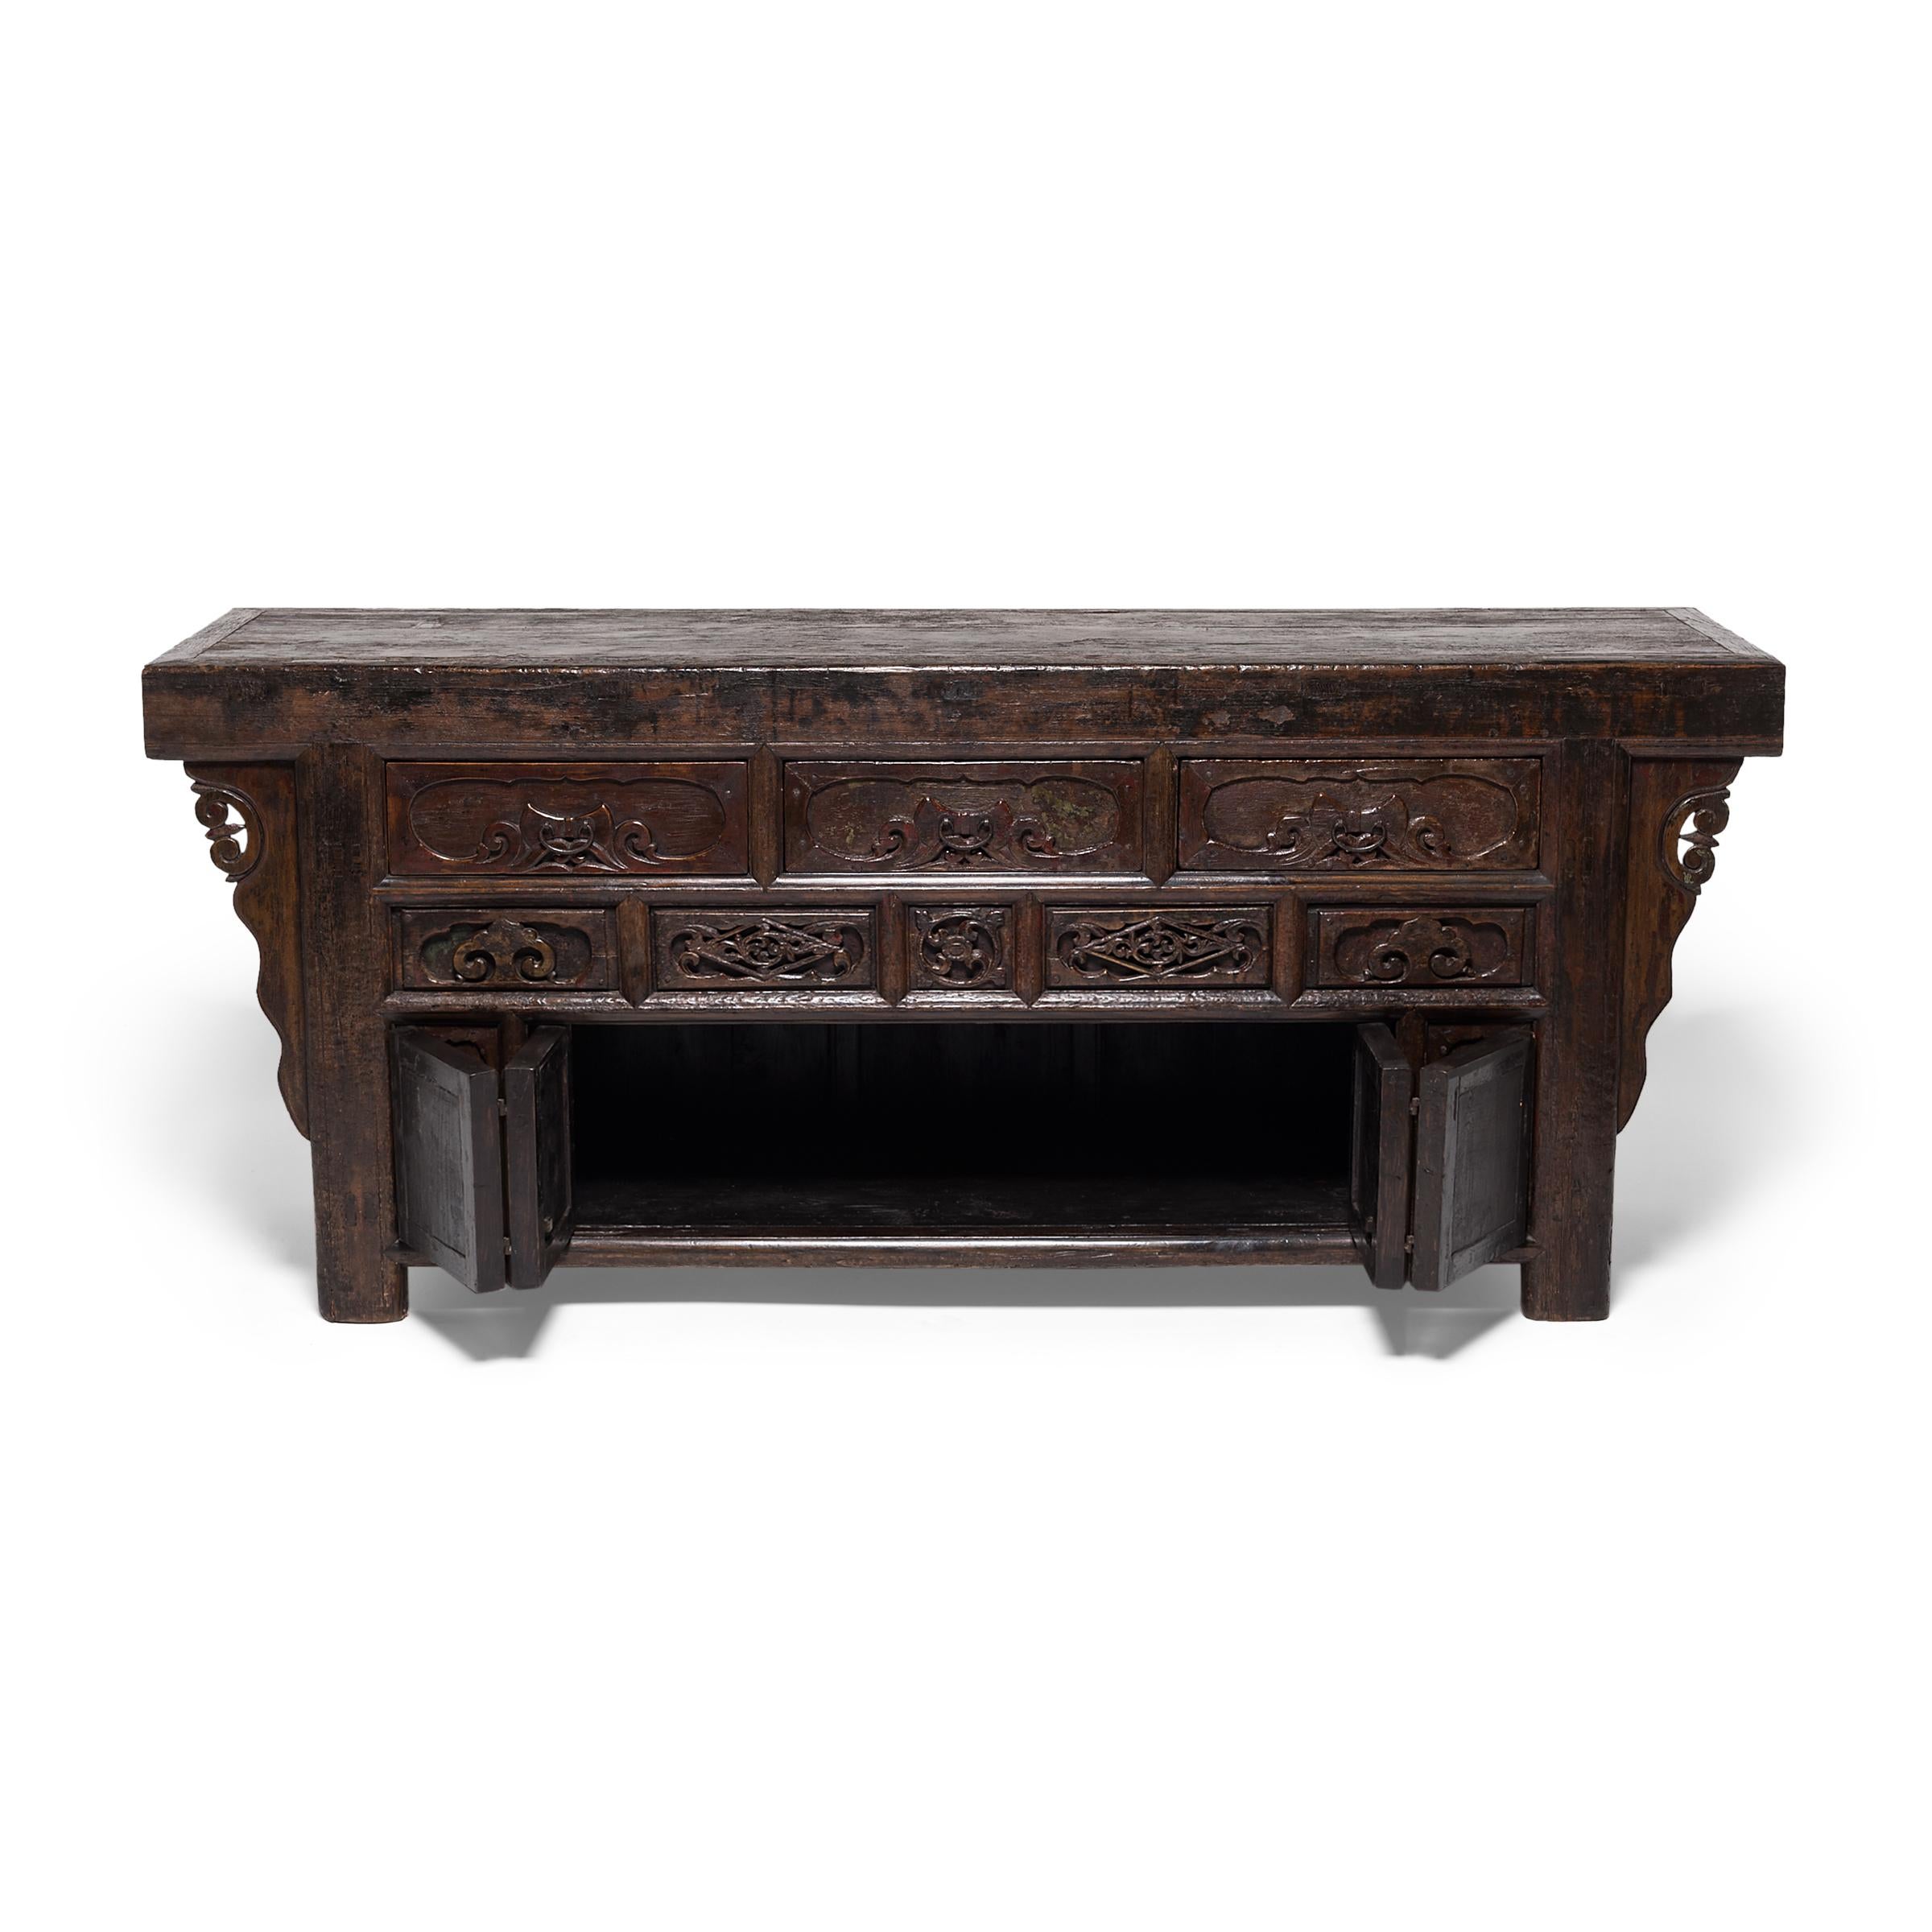 The grand scale of this 19th-century coffer suggests it was originally used in a Qing-dynasty home as a family altar. Incense, candles, and fruits would have covered the cabinet top as offerings to the family's ancestors. Such items were stored in